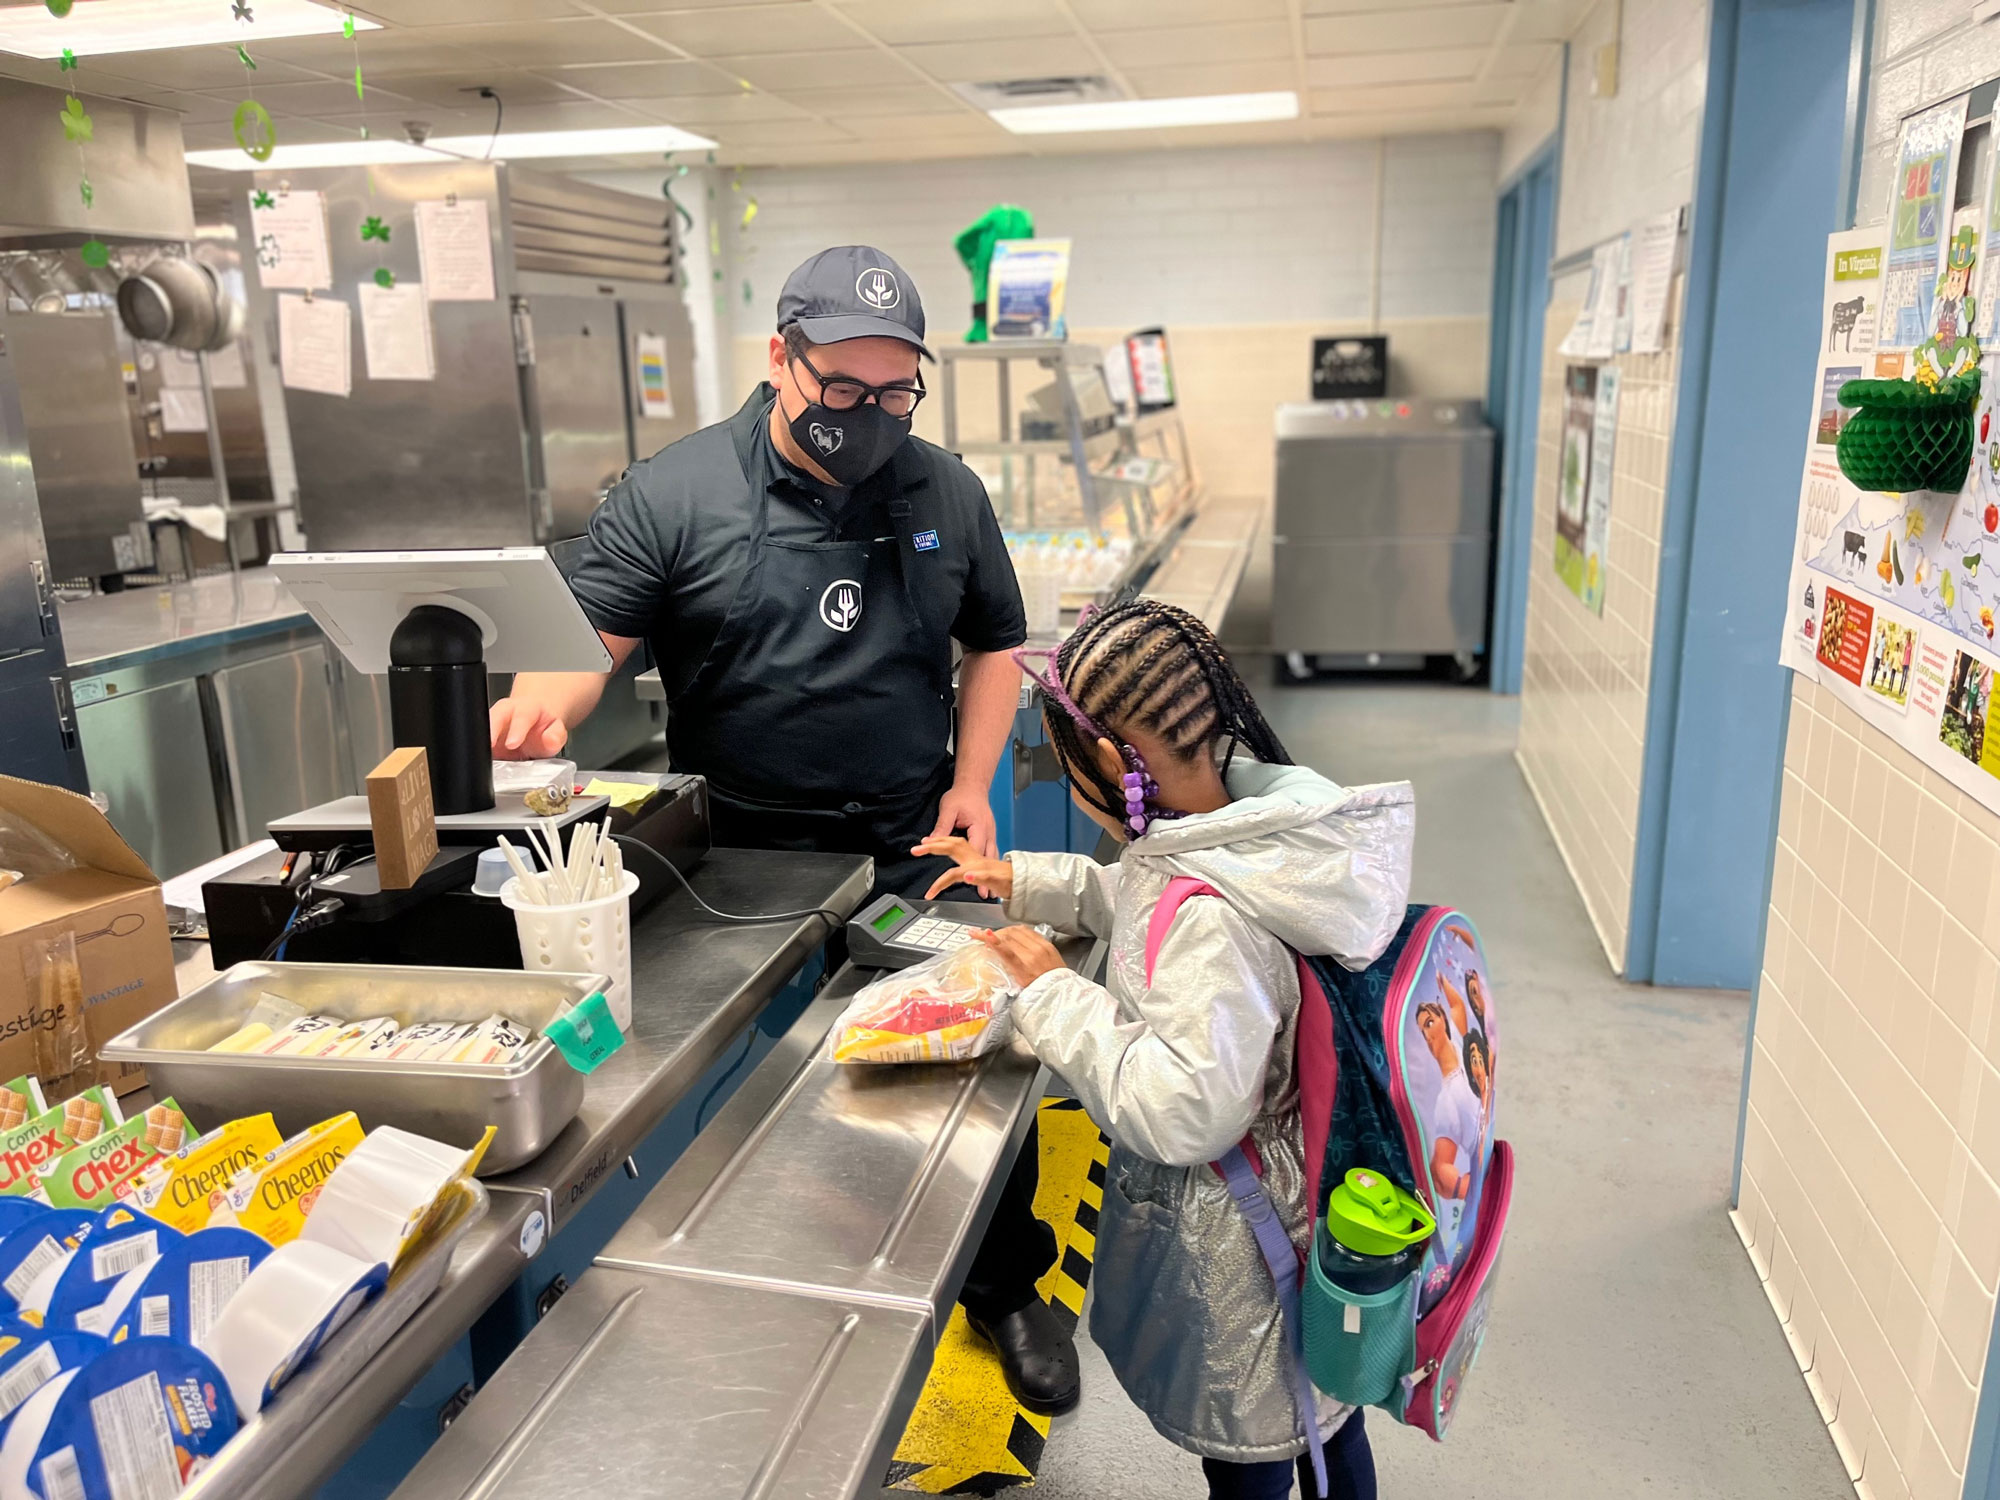 Student receives breakfast from school meal professional in the school kitchen